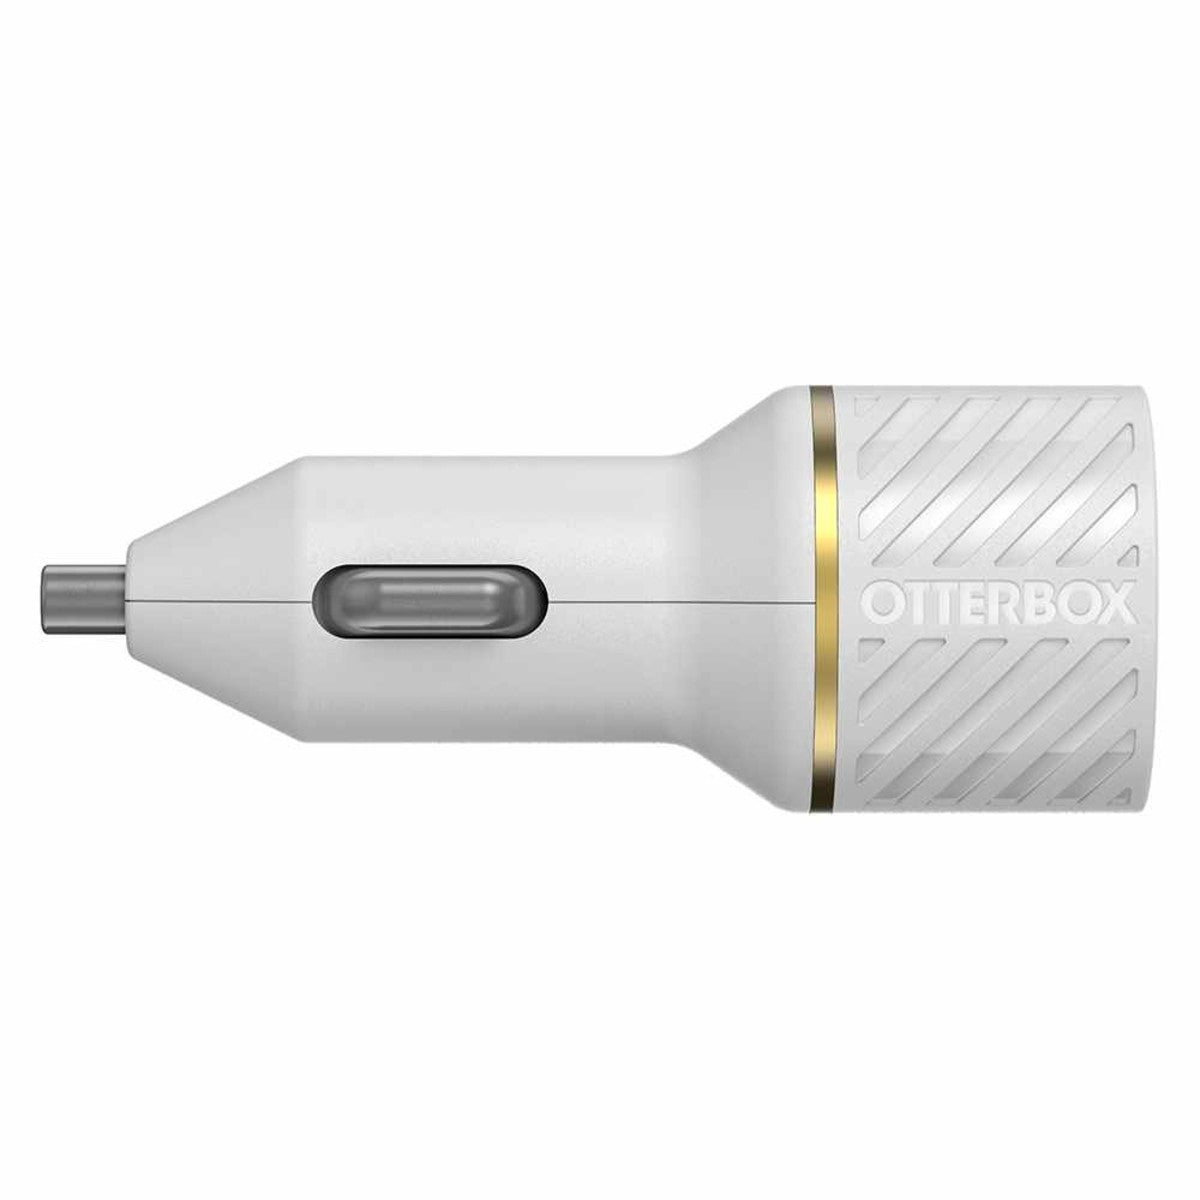 Dual USB Premium Fast Charge Car Charger PD 30W + PD 20W White